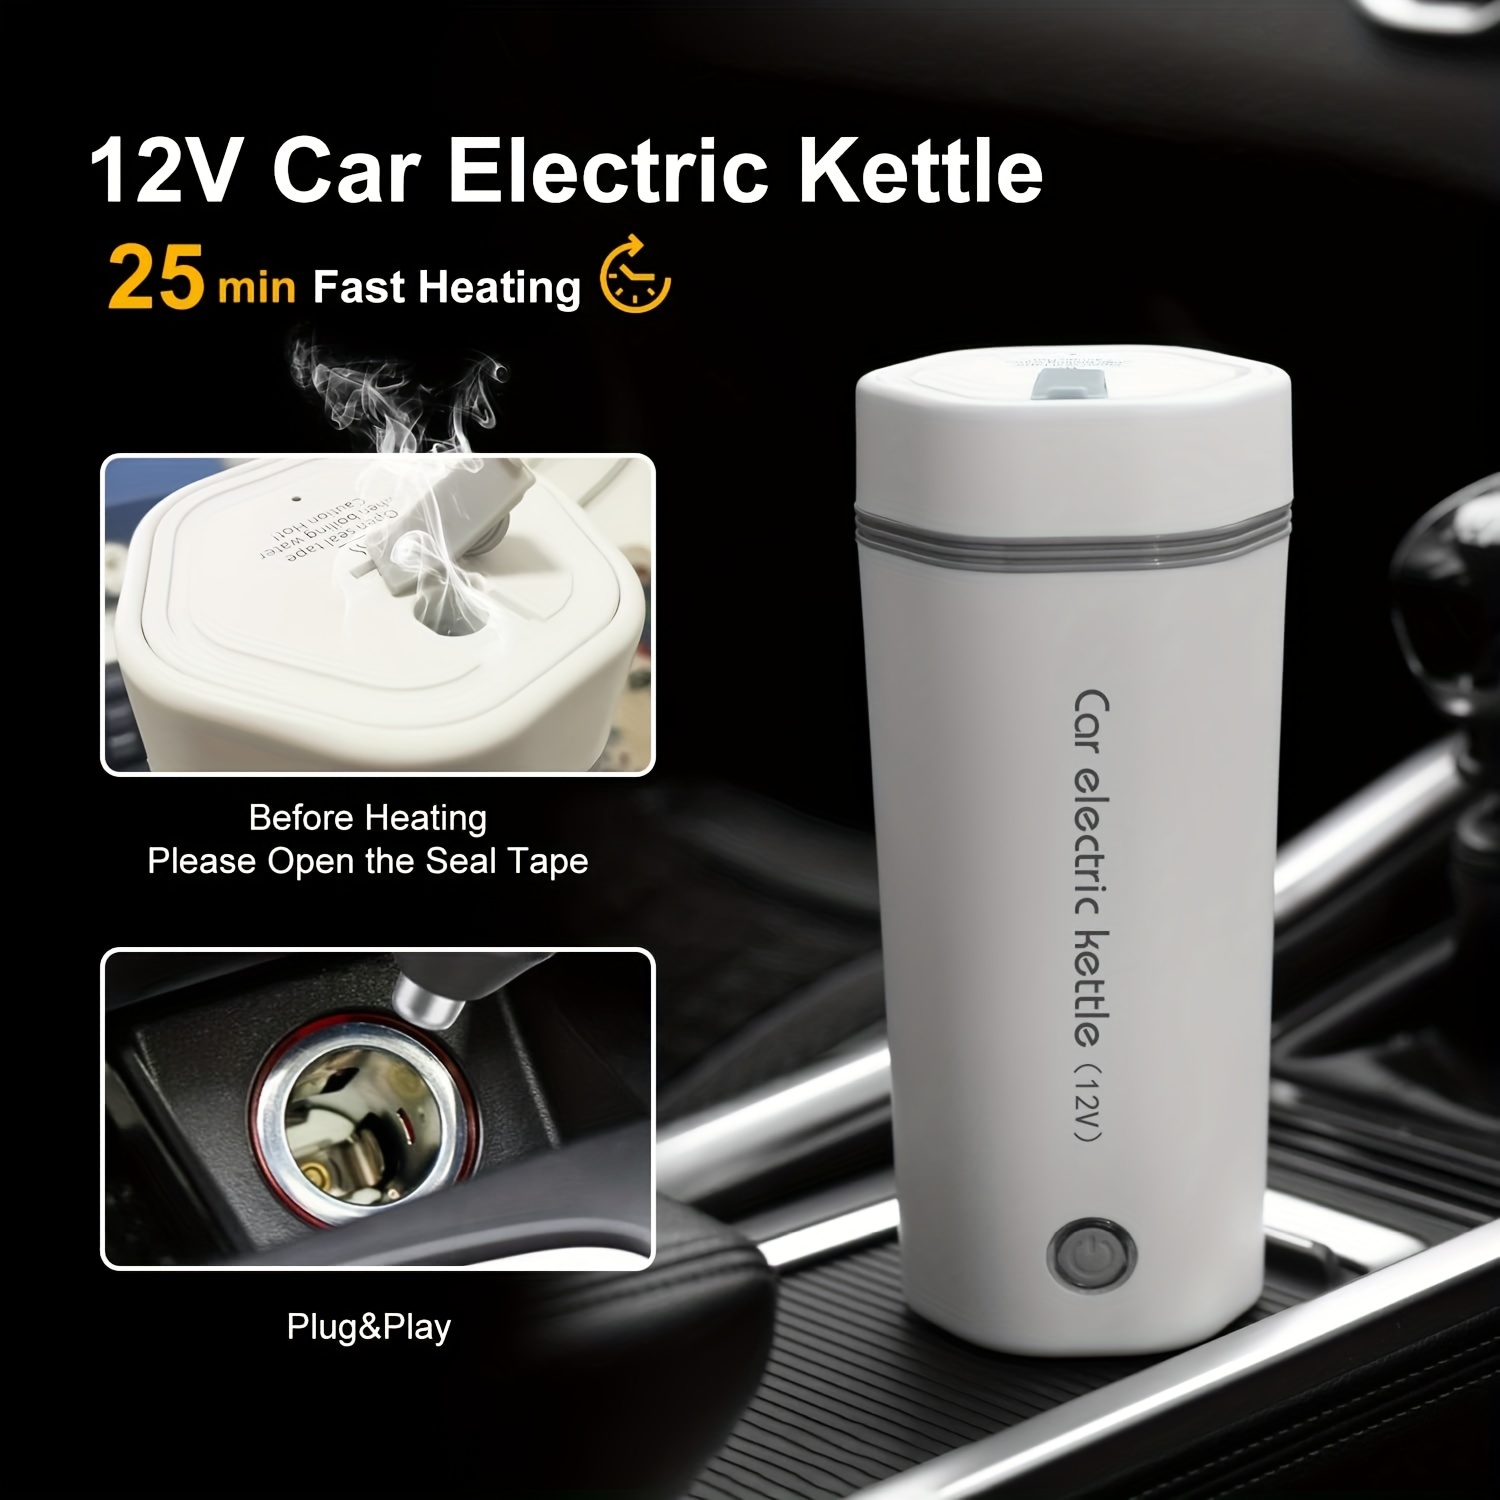 This Collapsible Electric Kettle Is Perfect for Car Camping